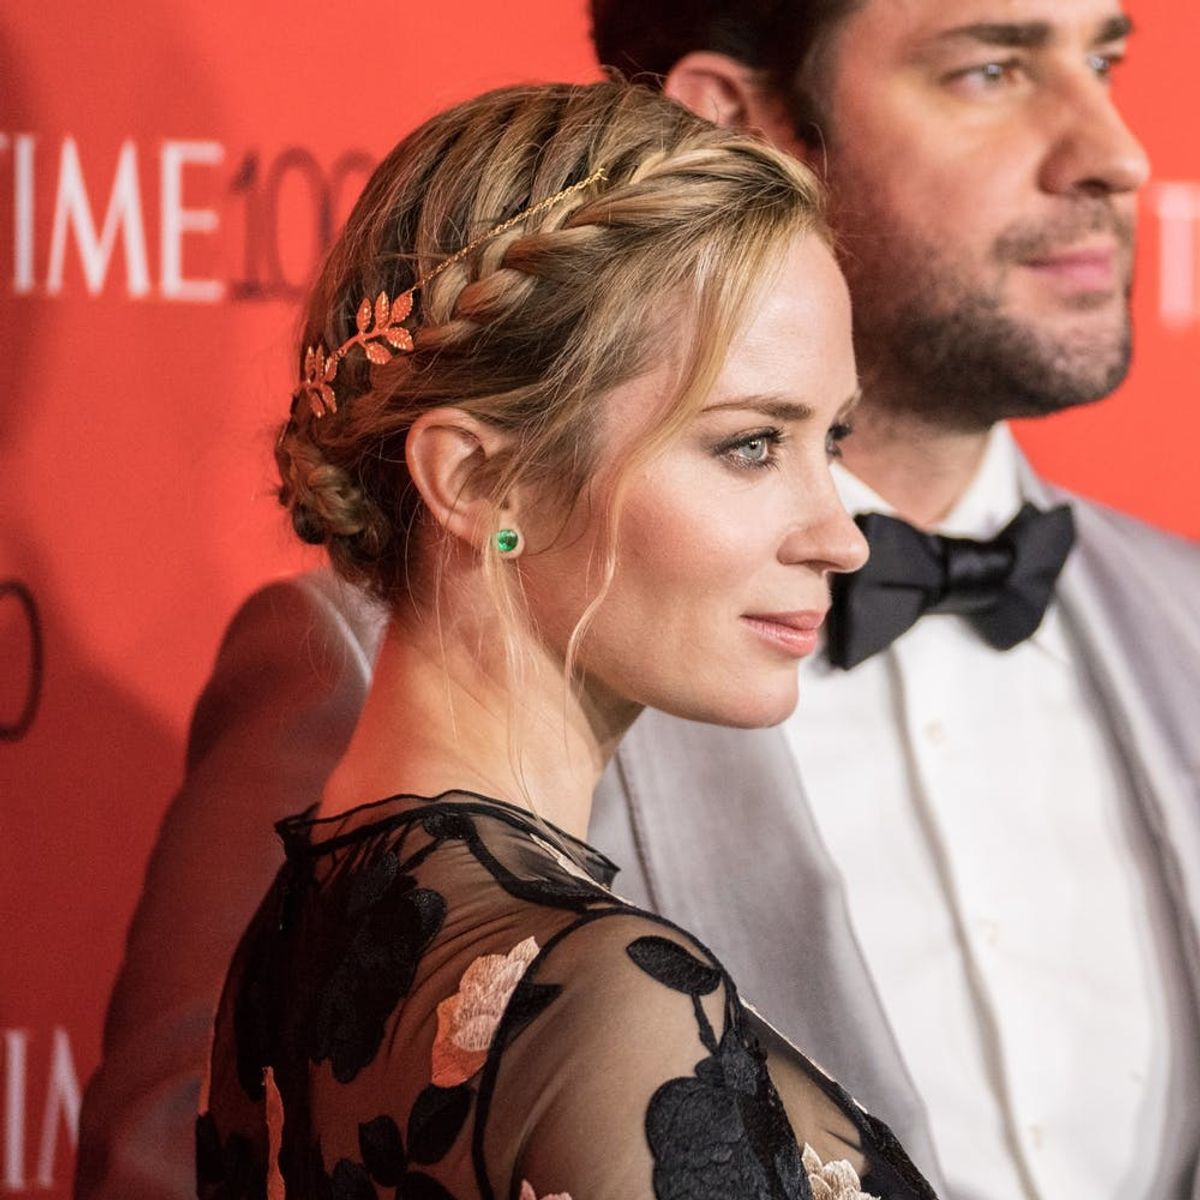 Emily Blunt’s $28 Hair Accessory Is Your New Date Night Style Staple